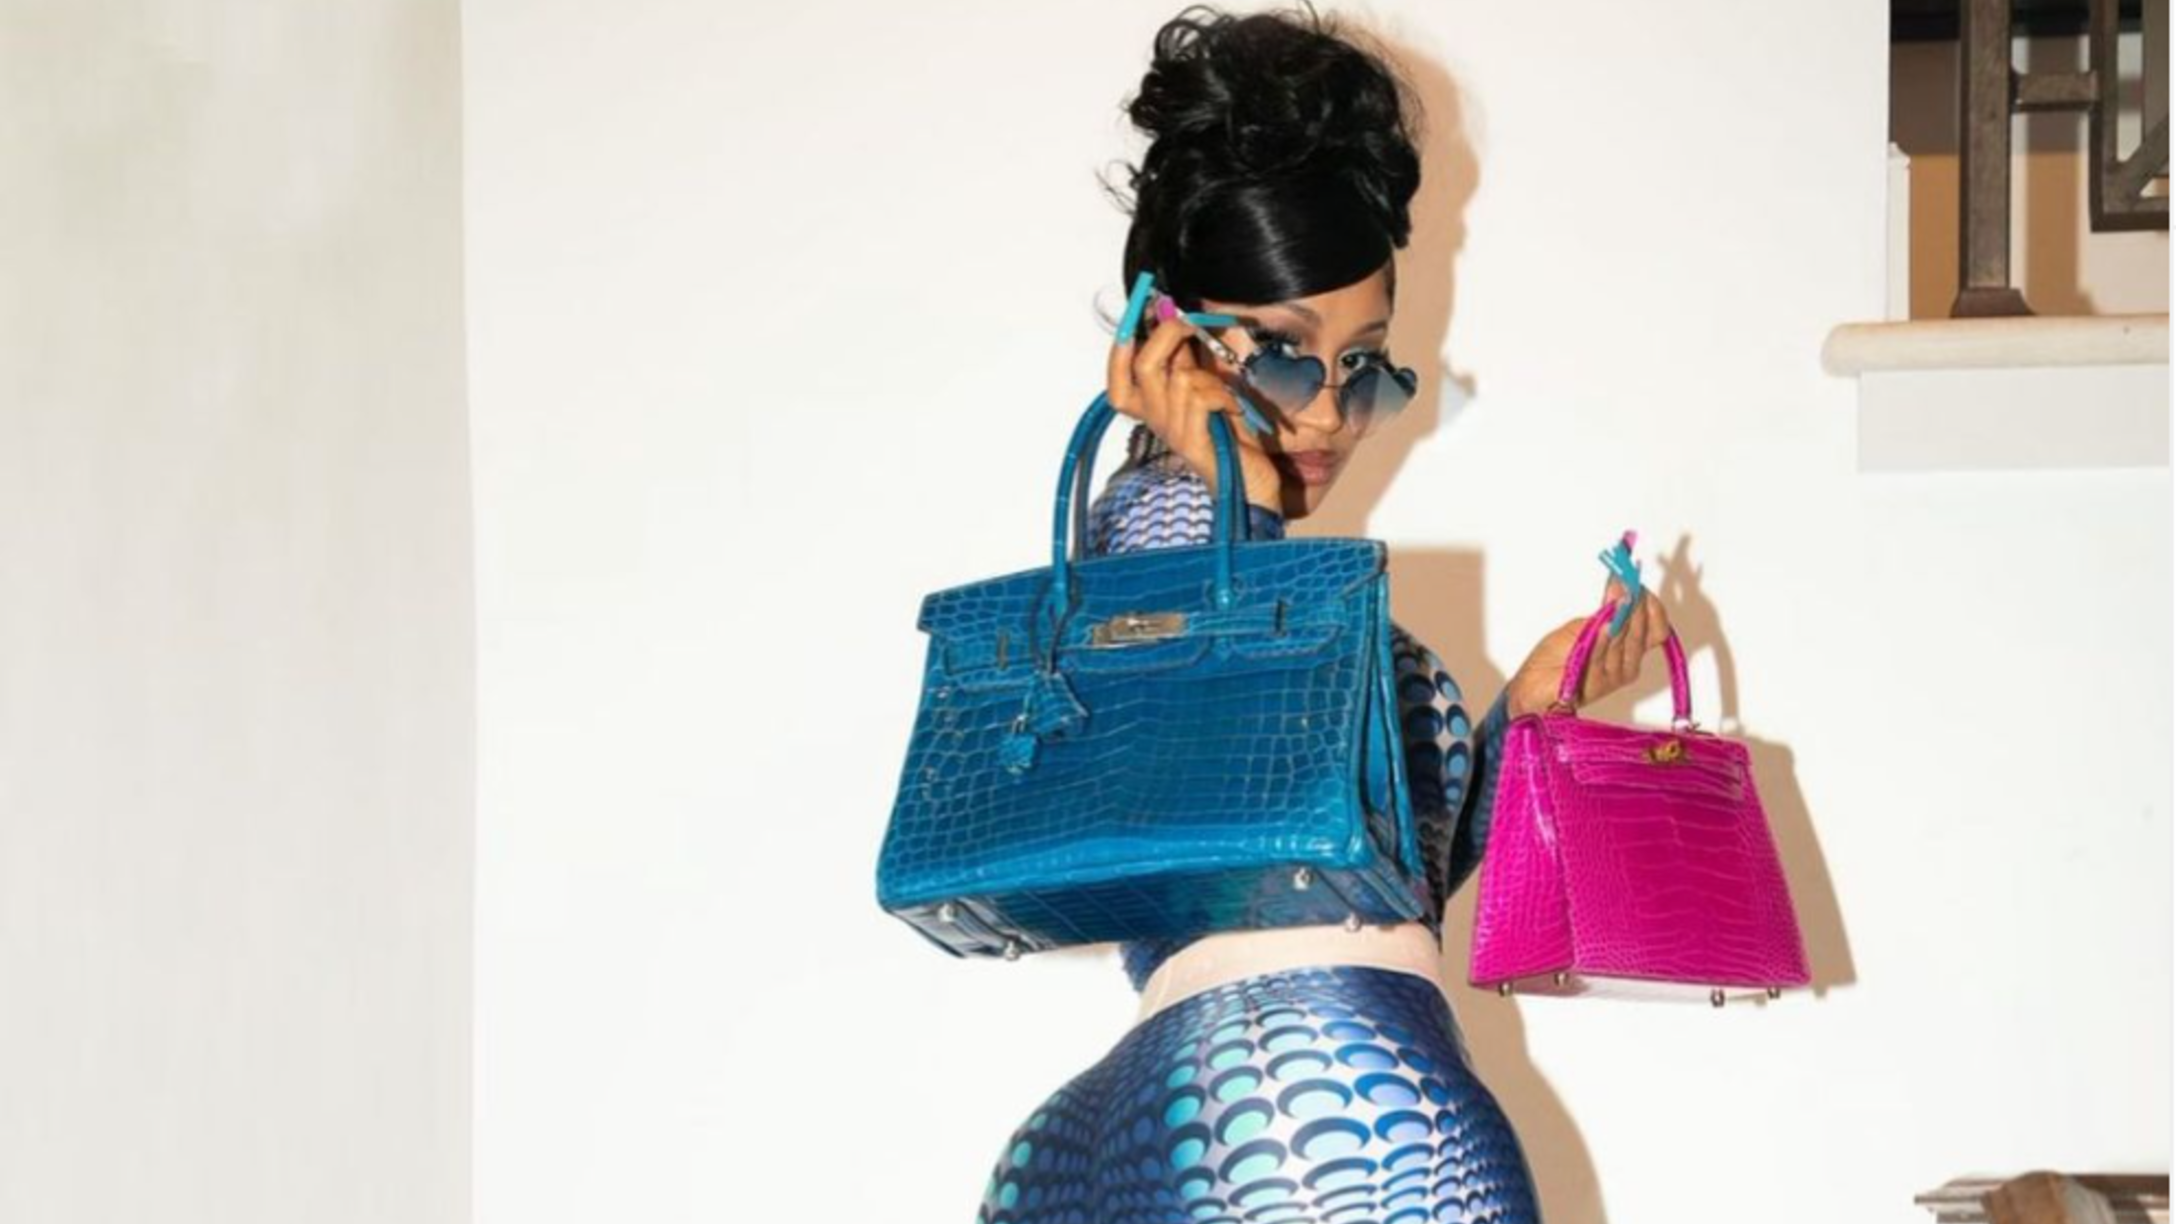 Cardi B shows off the luxury bags Offset gave on her birthday (photo)